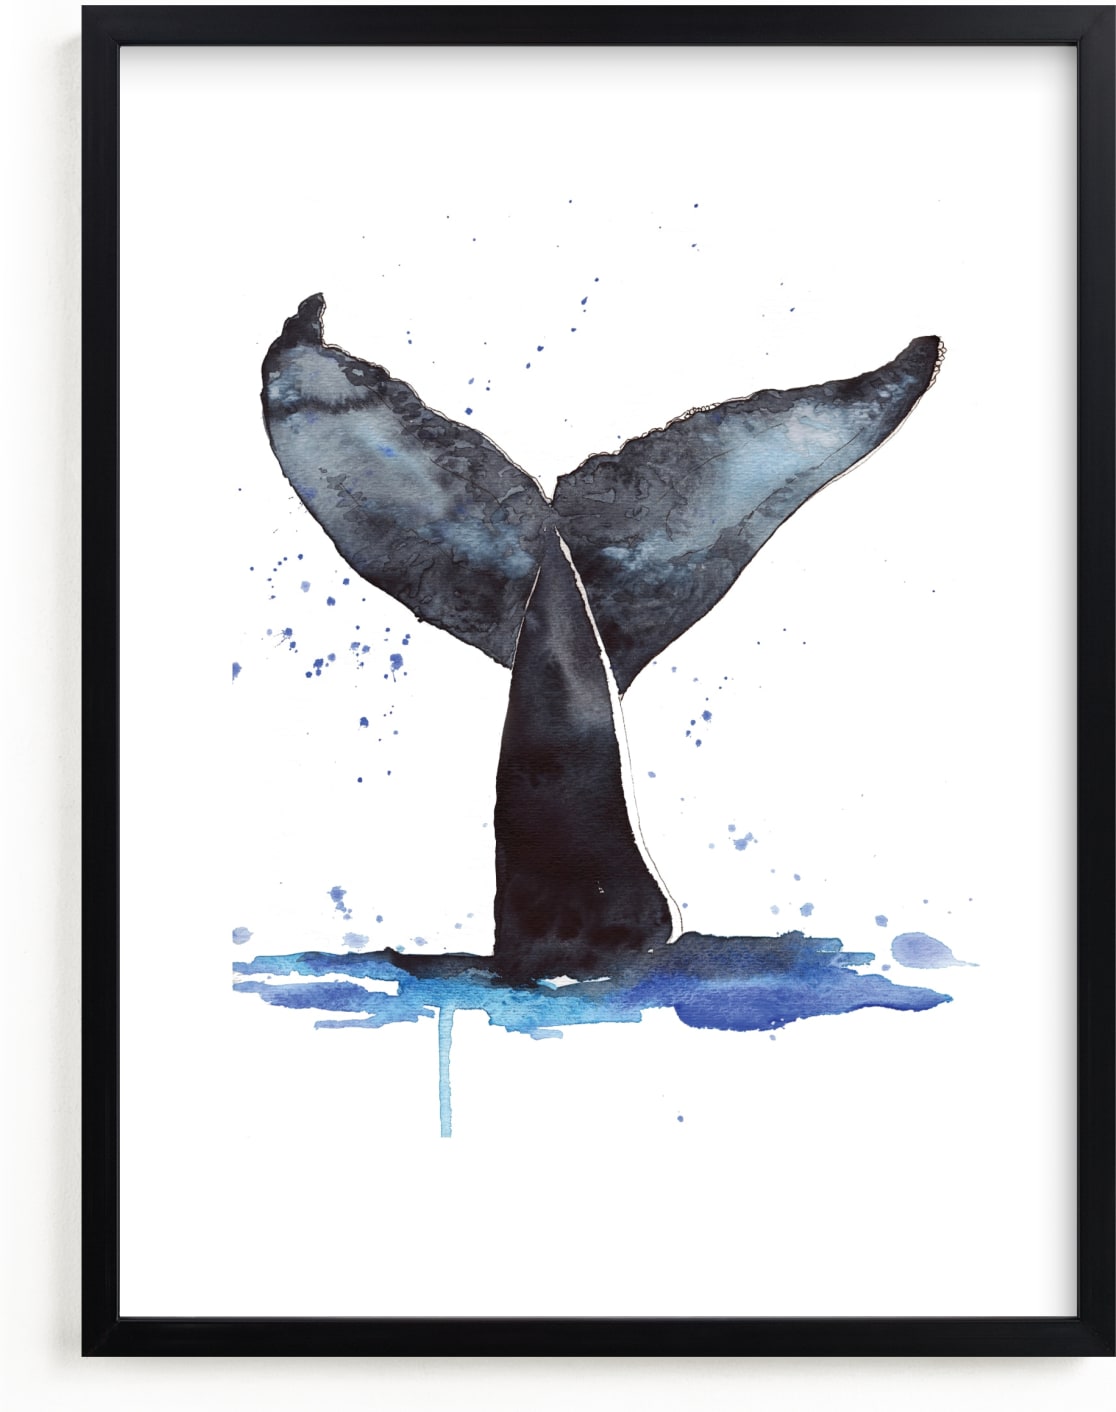 This is a blue art by Kelsey McNatt called Whale Tale.